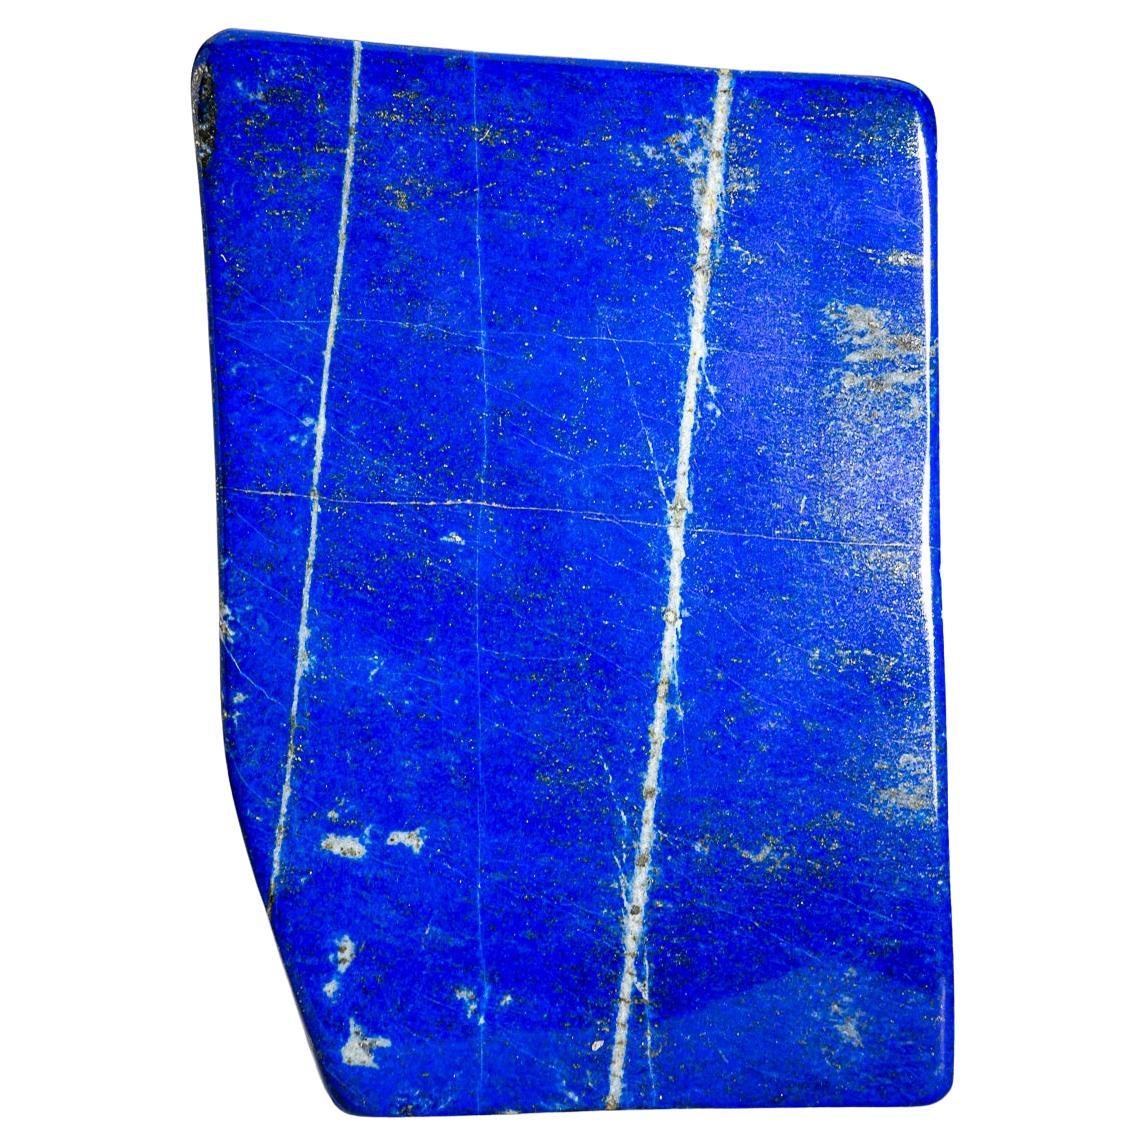 Polished Lapis Lazuli Freeform from Afghanistan (4 lbs) For Sale